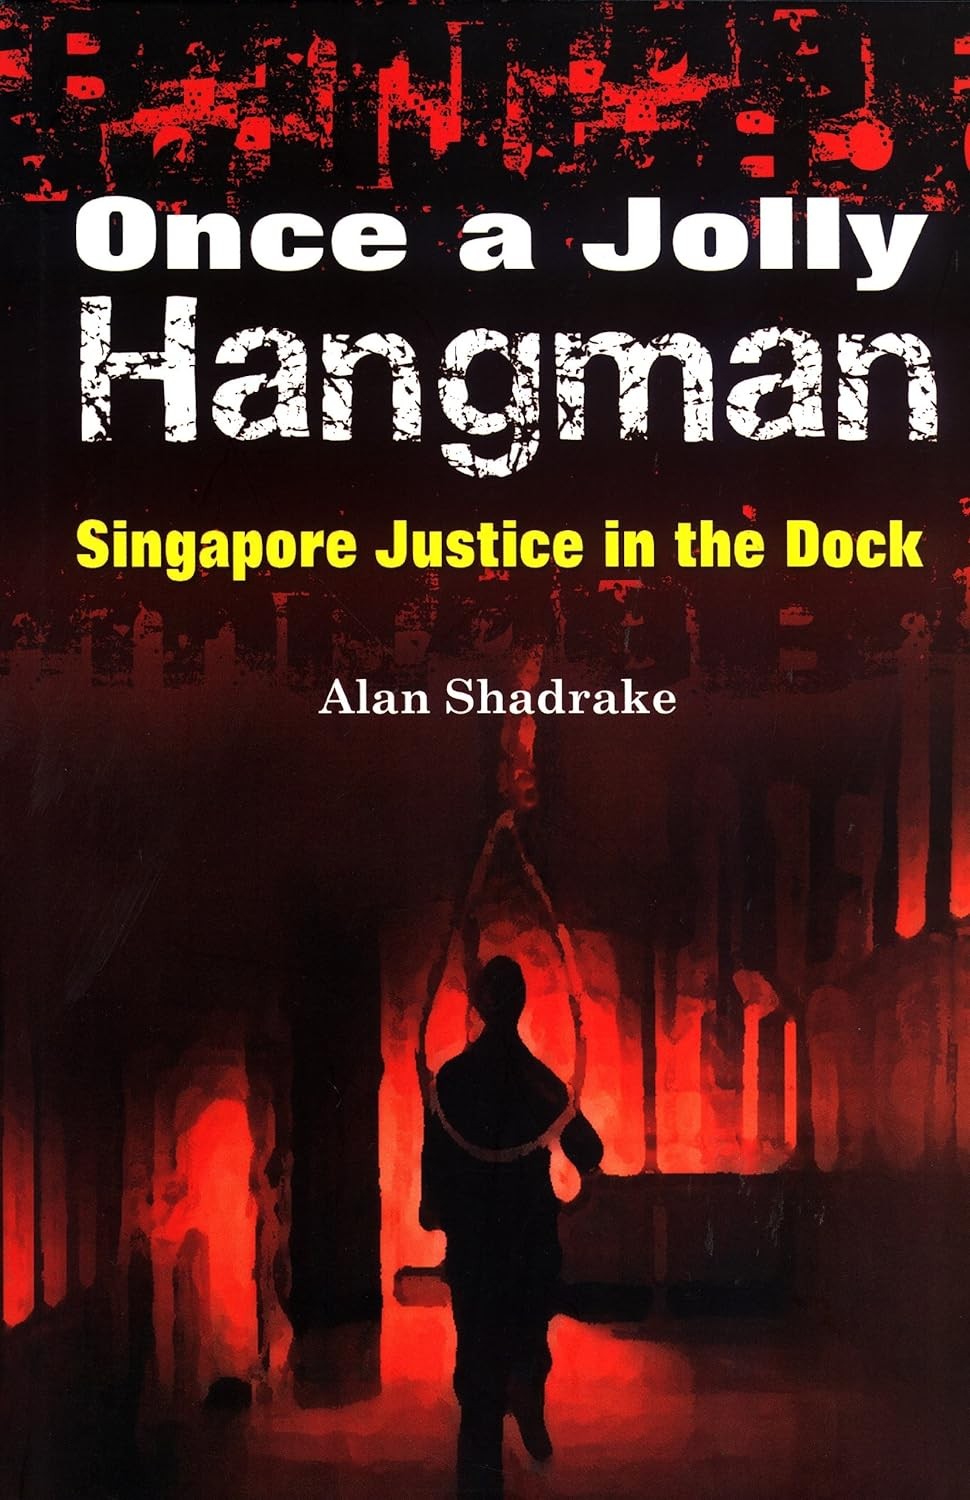 Once a Jolly Hangman: Singapore Justice in the Dock